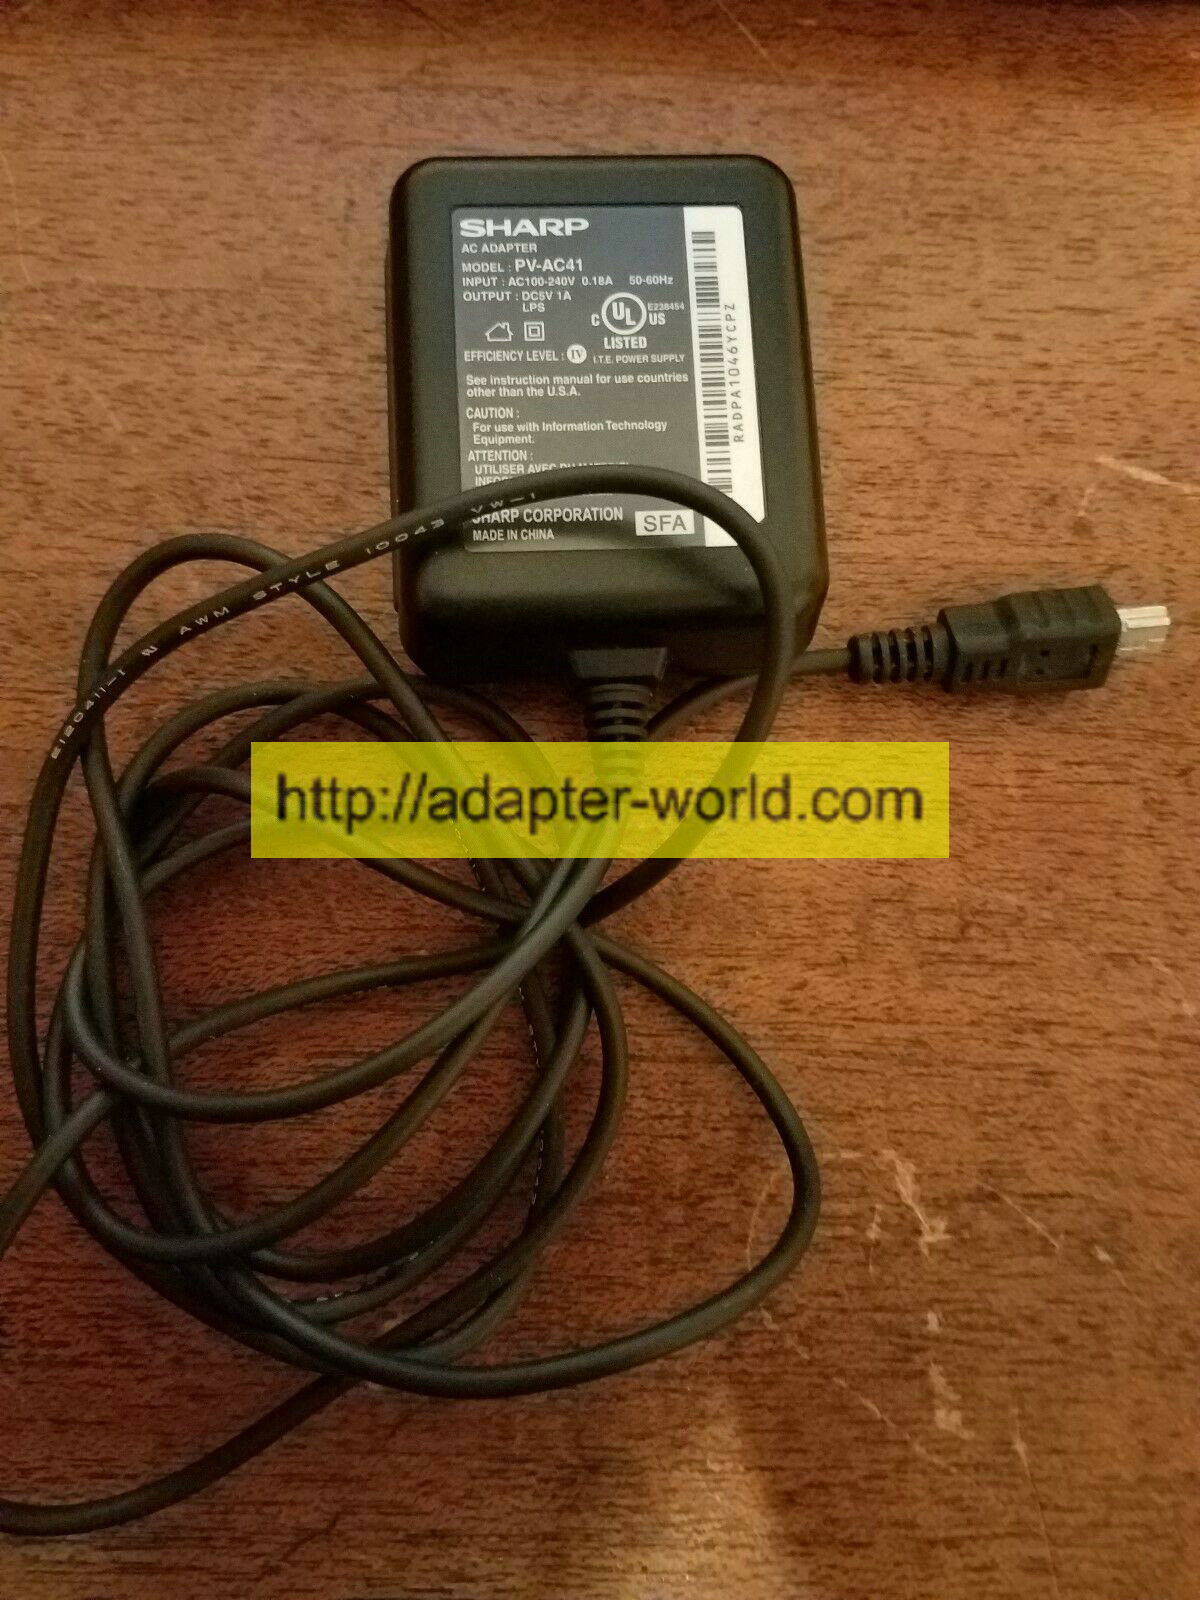 *100% Brand NEW* Output DC 5V 1A Sharp PV-AC41 ADAPTER POWER SUPPLY